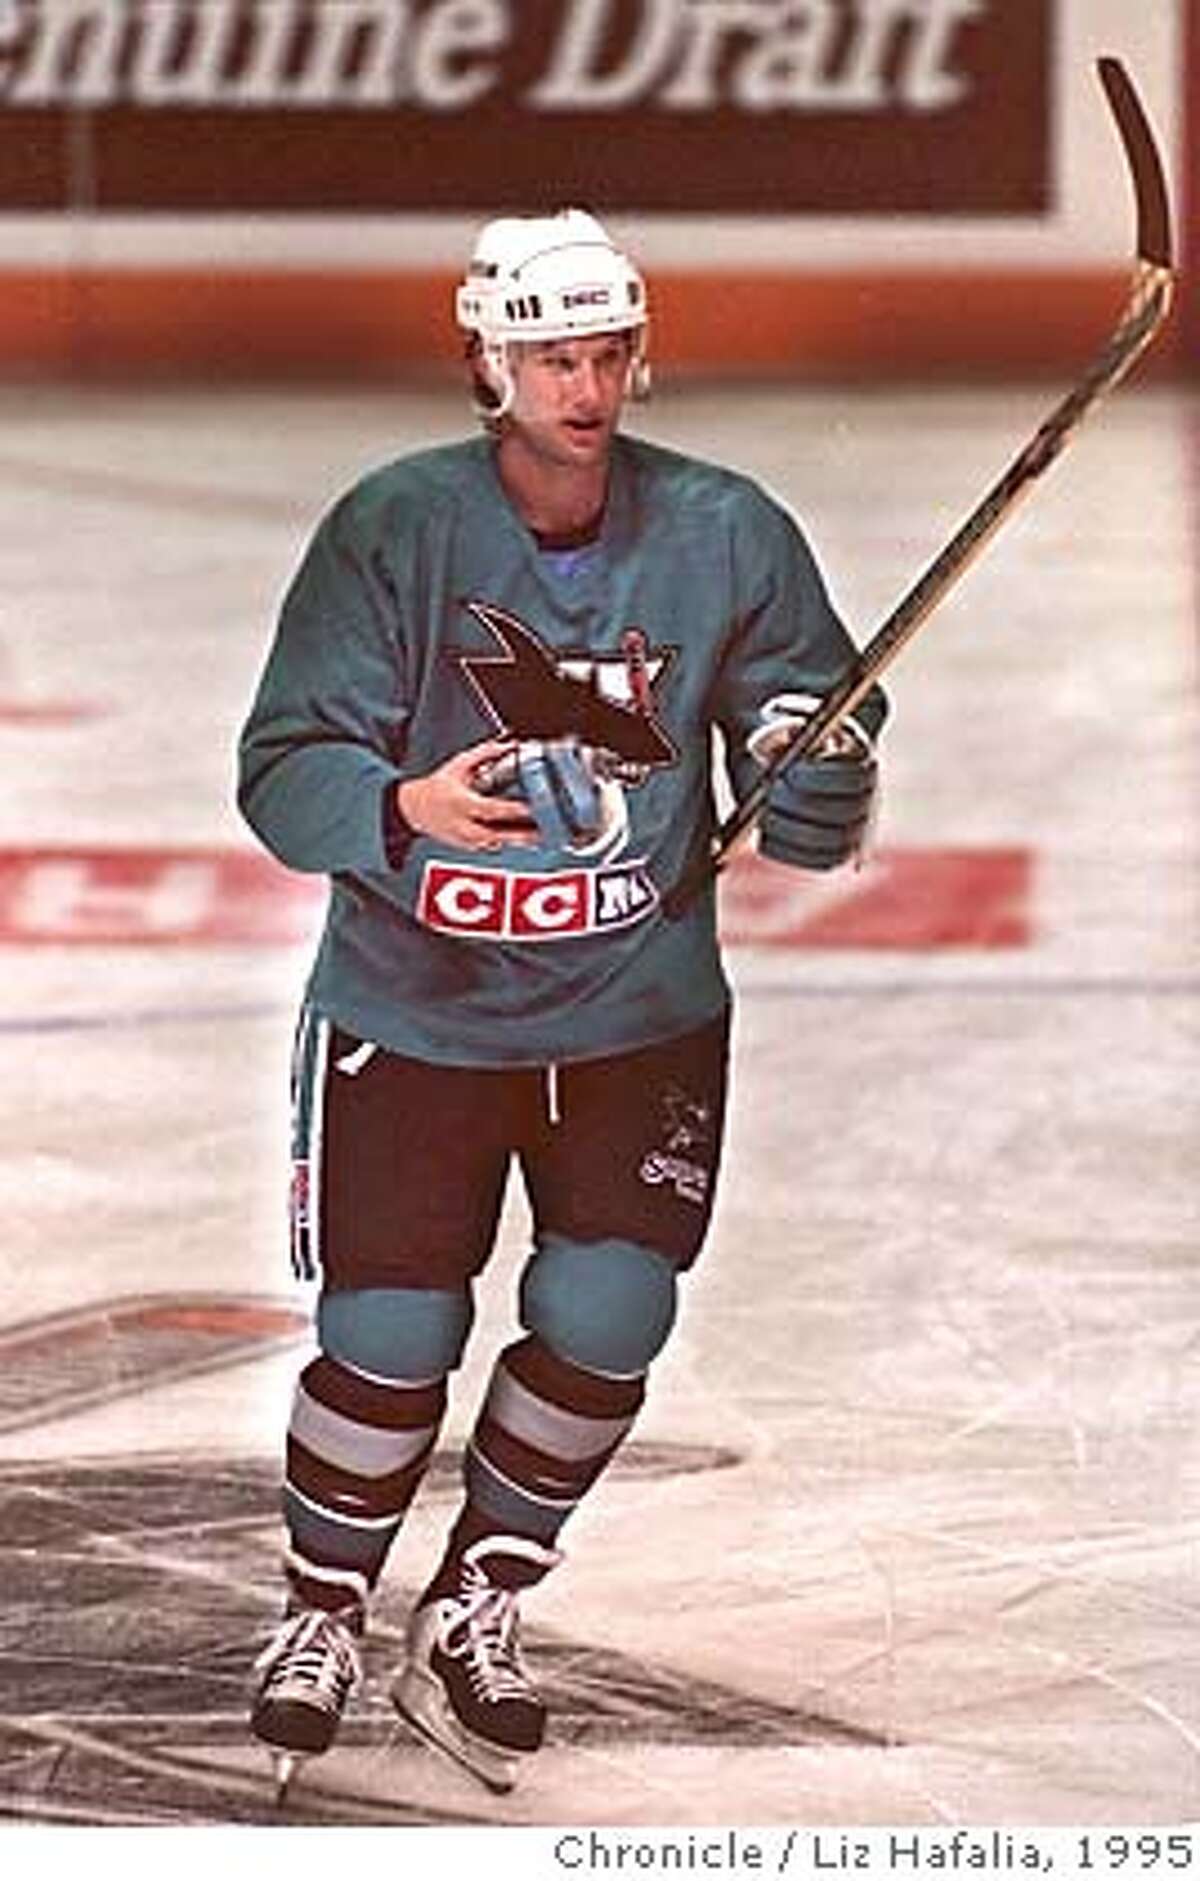 NHL - Georges Laraque x Peter Forsberg = The Finest